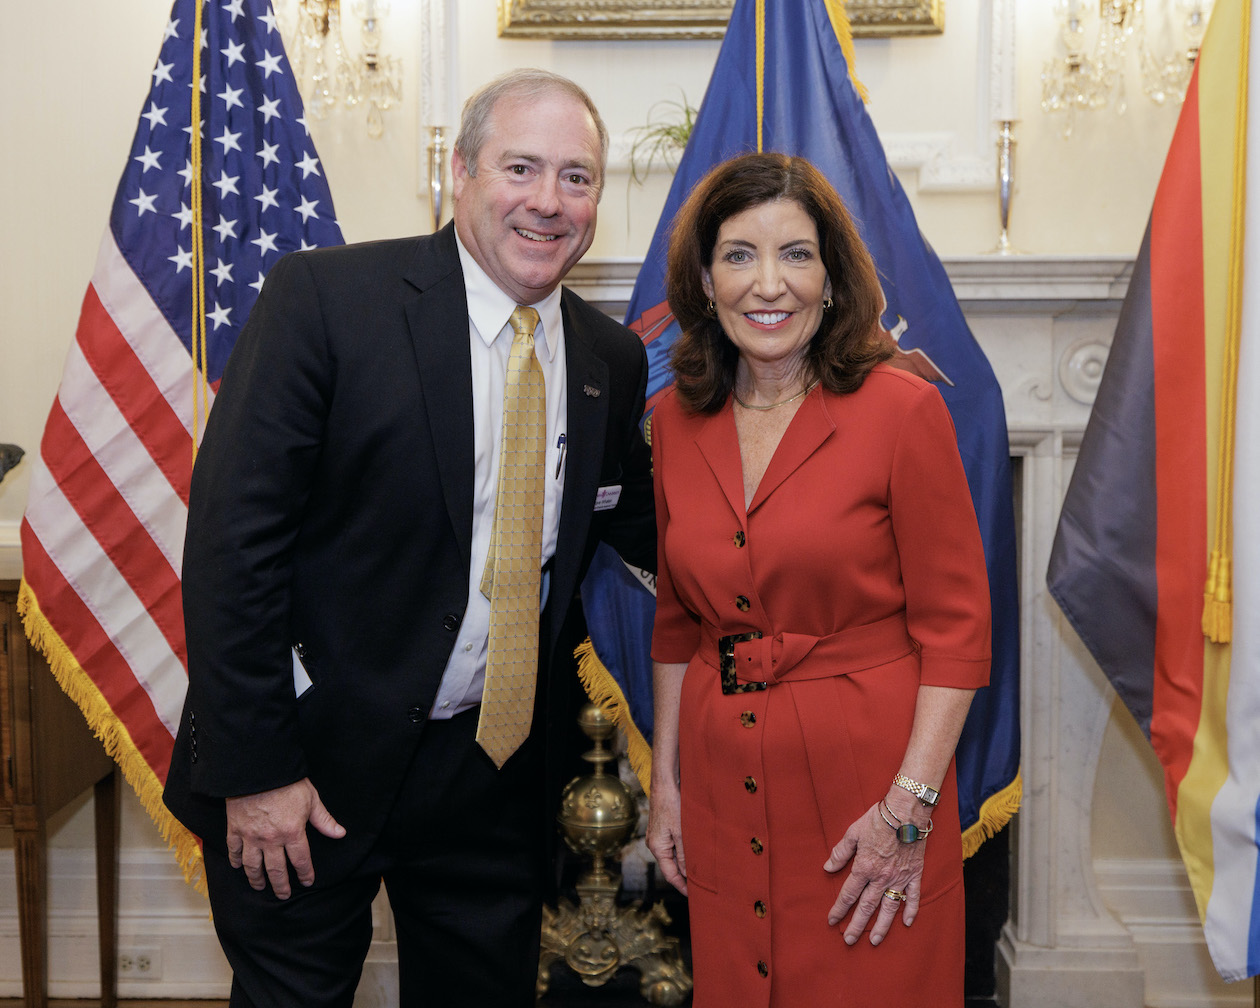 David Whalen, Niagara University's first/emergency responder disability awareness training project director and ADA coordinator, with Gov. Kathy Hochul. (NU photo)